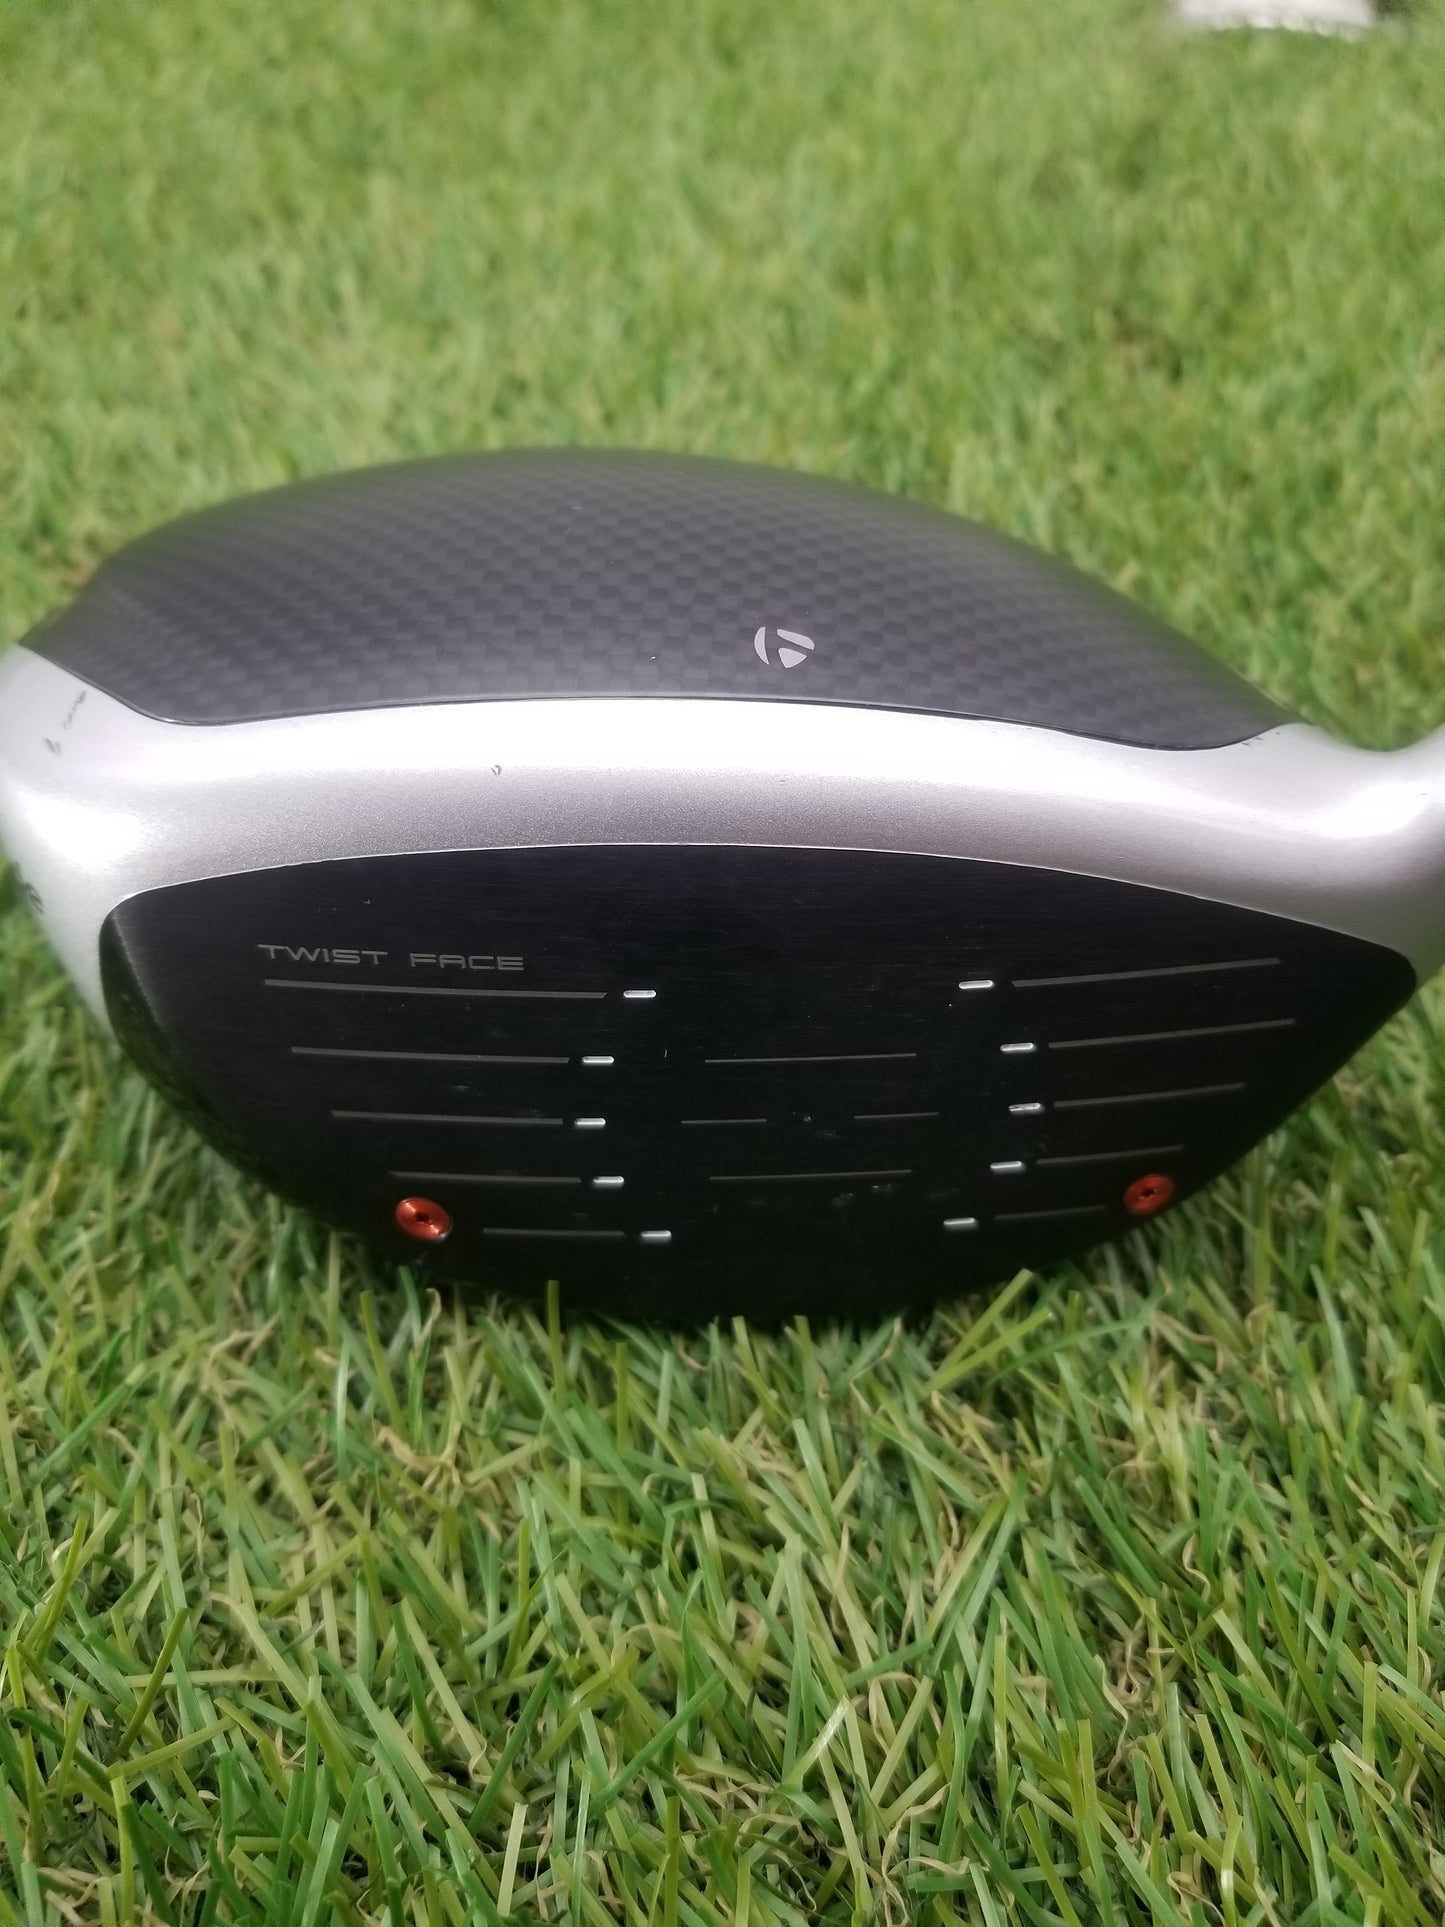 2019 TAYLORMADE M5 DRIVER 10.5 CLUBHEAD ONLY GOOD